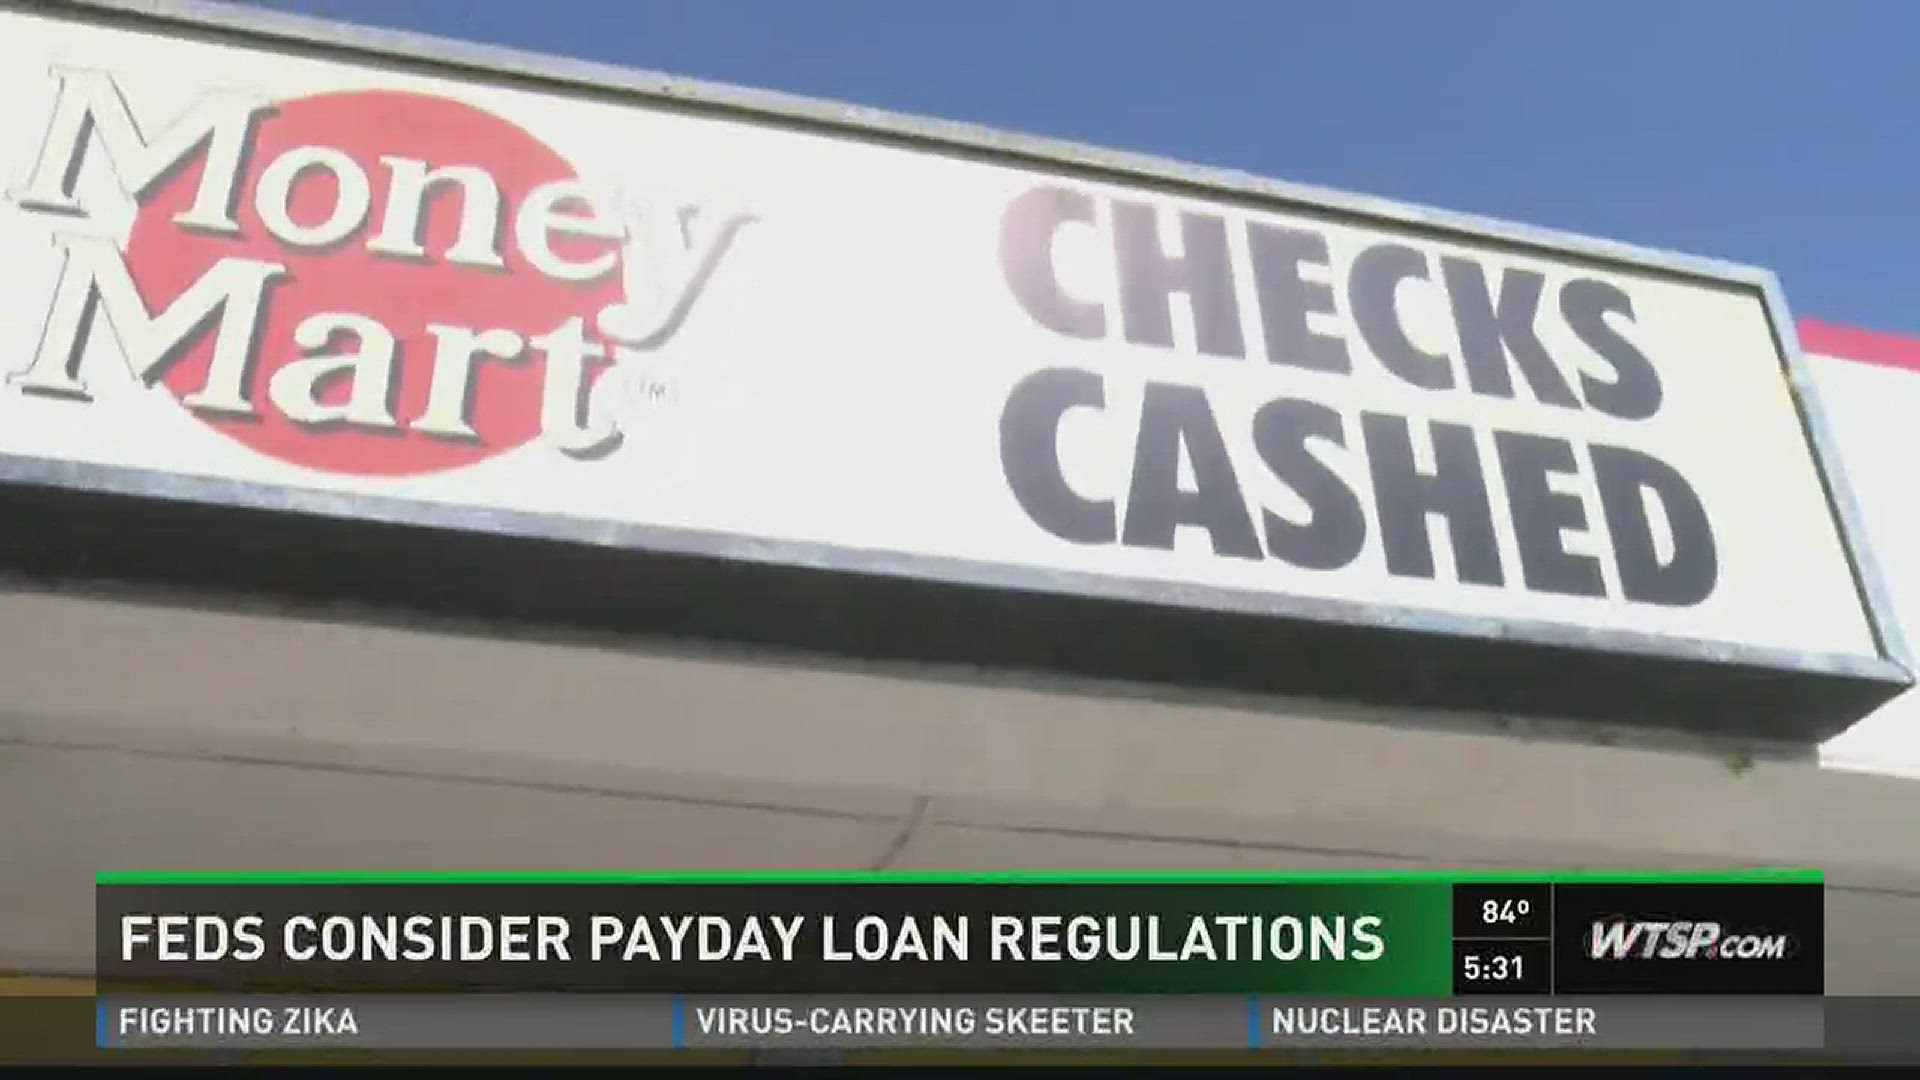 Federal officials are considering new rules for payday loans, even though Florida has tough laws.